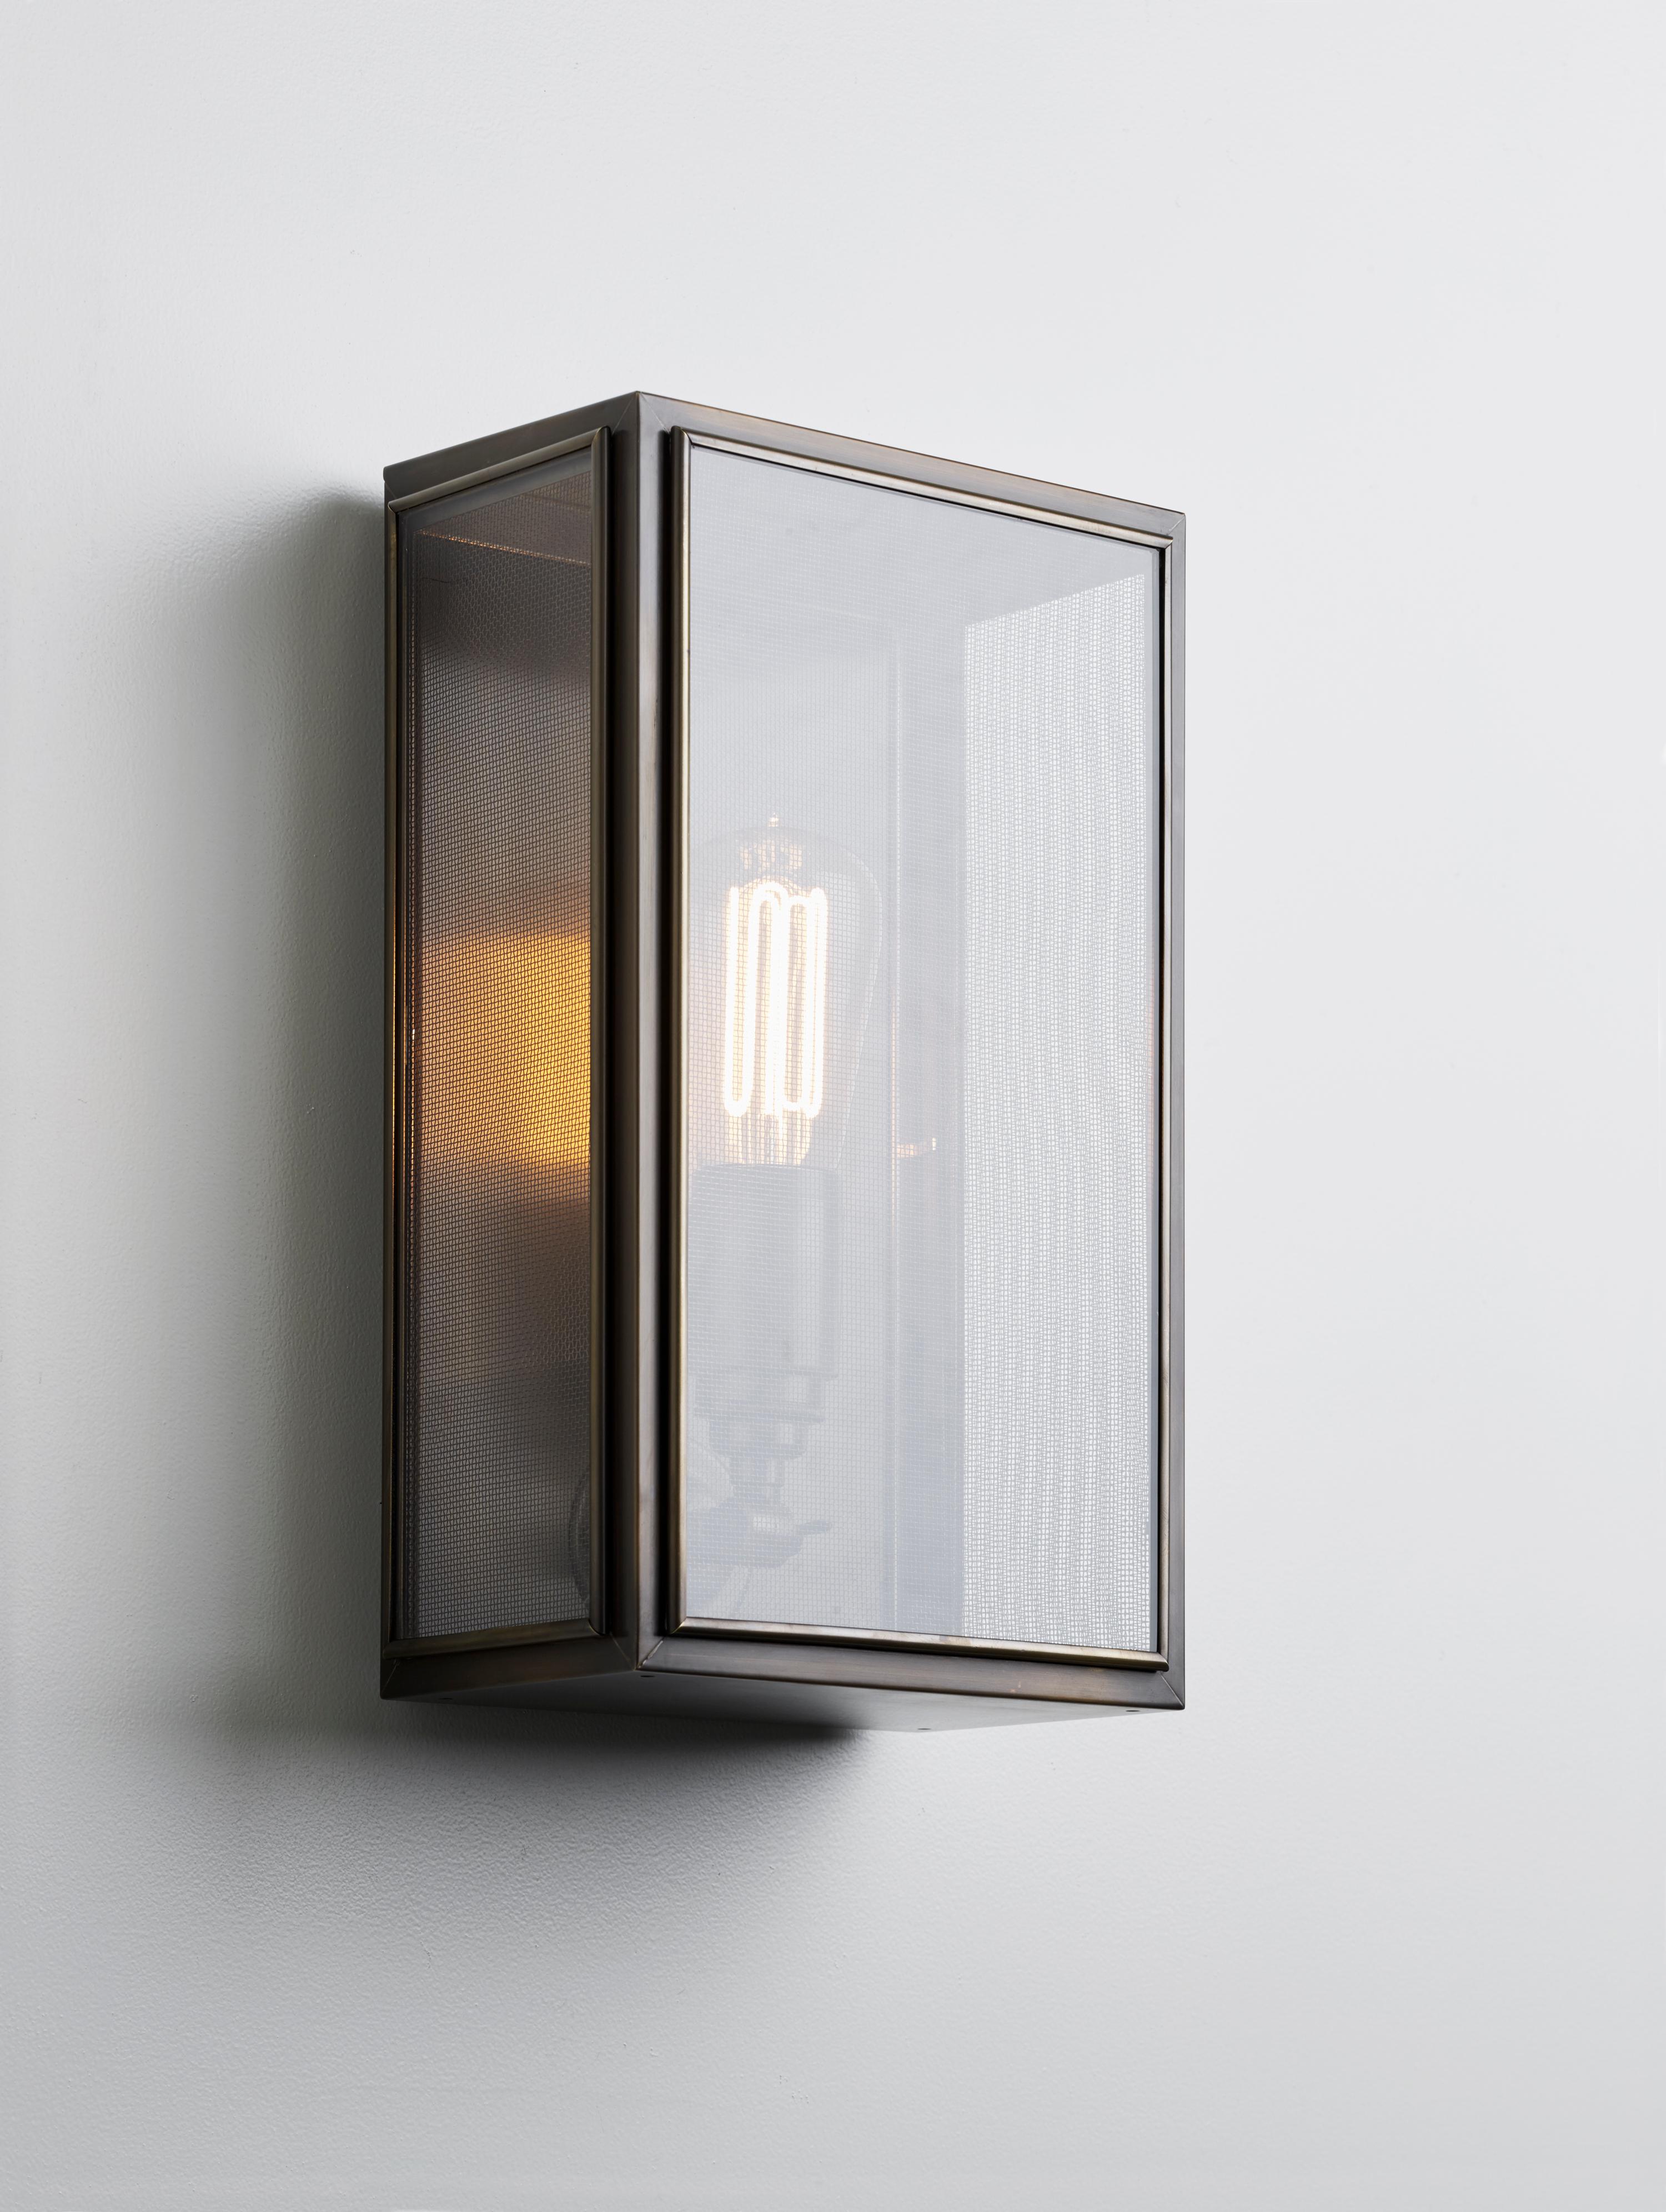 Wall light in brass with outside fitted clear glass and spring closure. Gauze: (removable) woven metal gauze at the inside of the light fitting. For indoor and outdoor use (IP44).

Caret squirrel cage lamp 230V E27 7,7W 2300K. Main power 230V 50Hz.